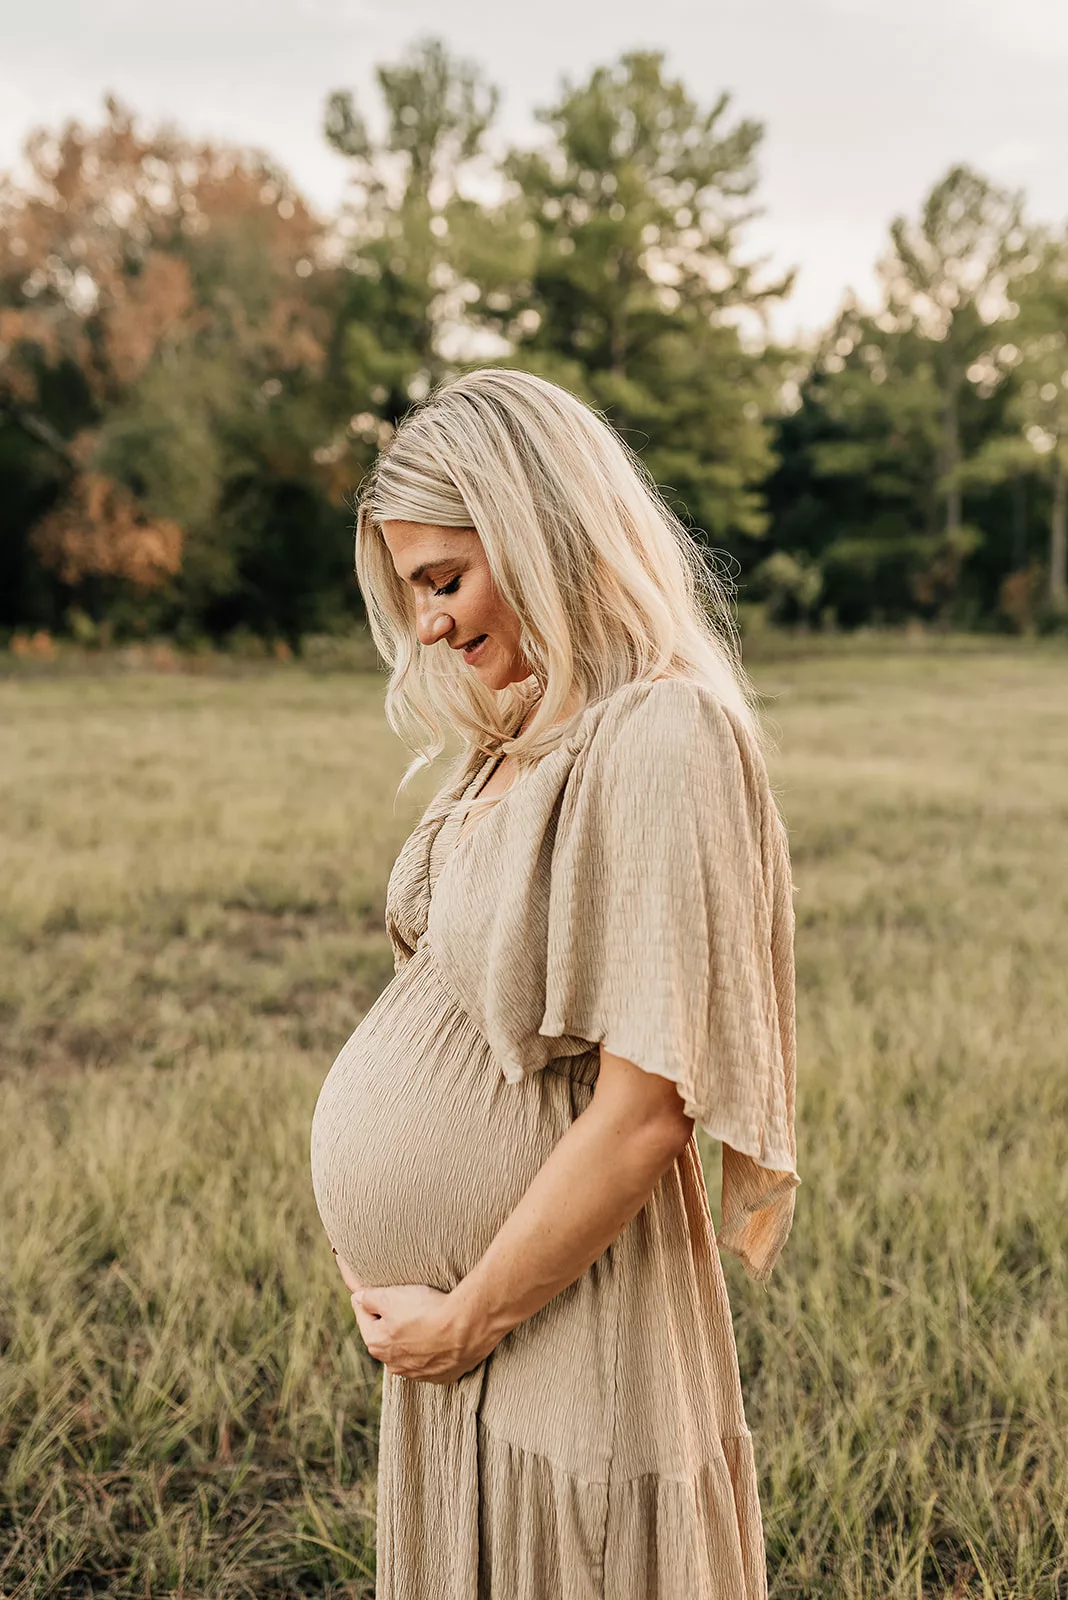 A mom to be in a tan dress stands in a field smiling down at the bump in her hands before meeting with a Houston Postpartum Doula